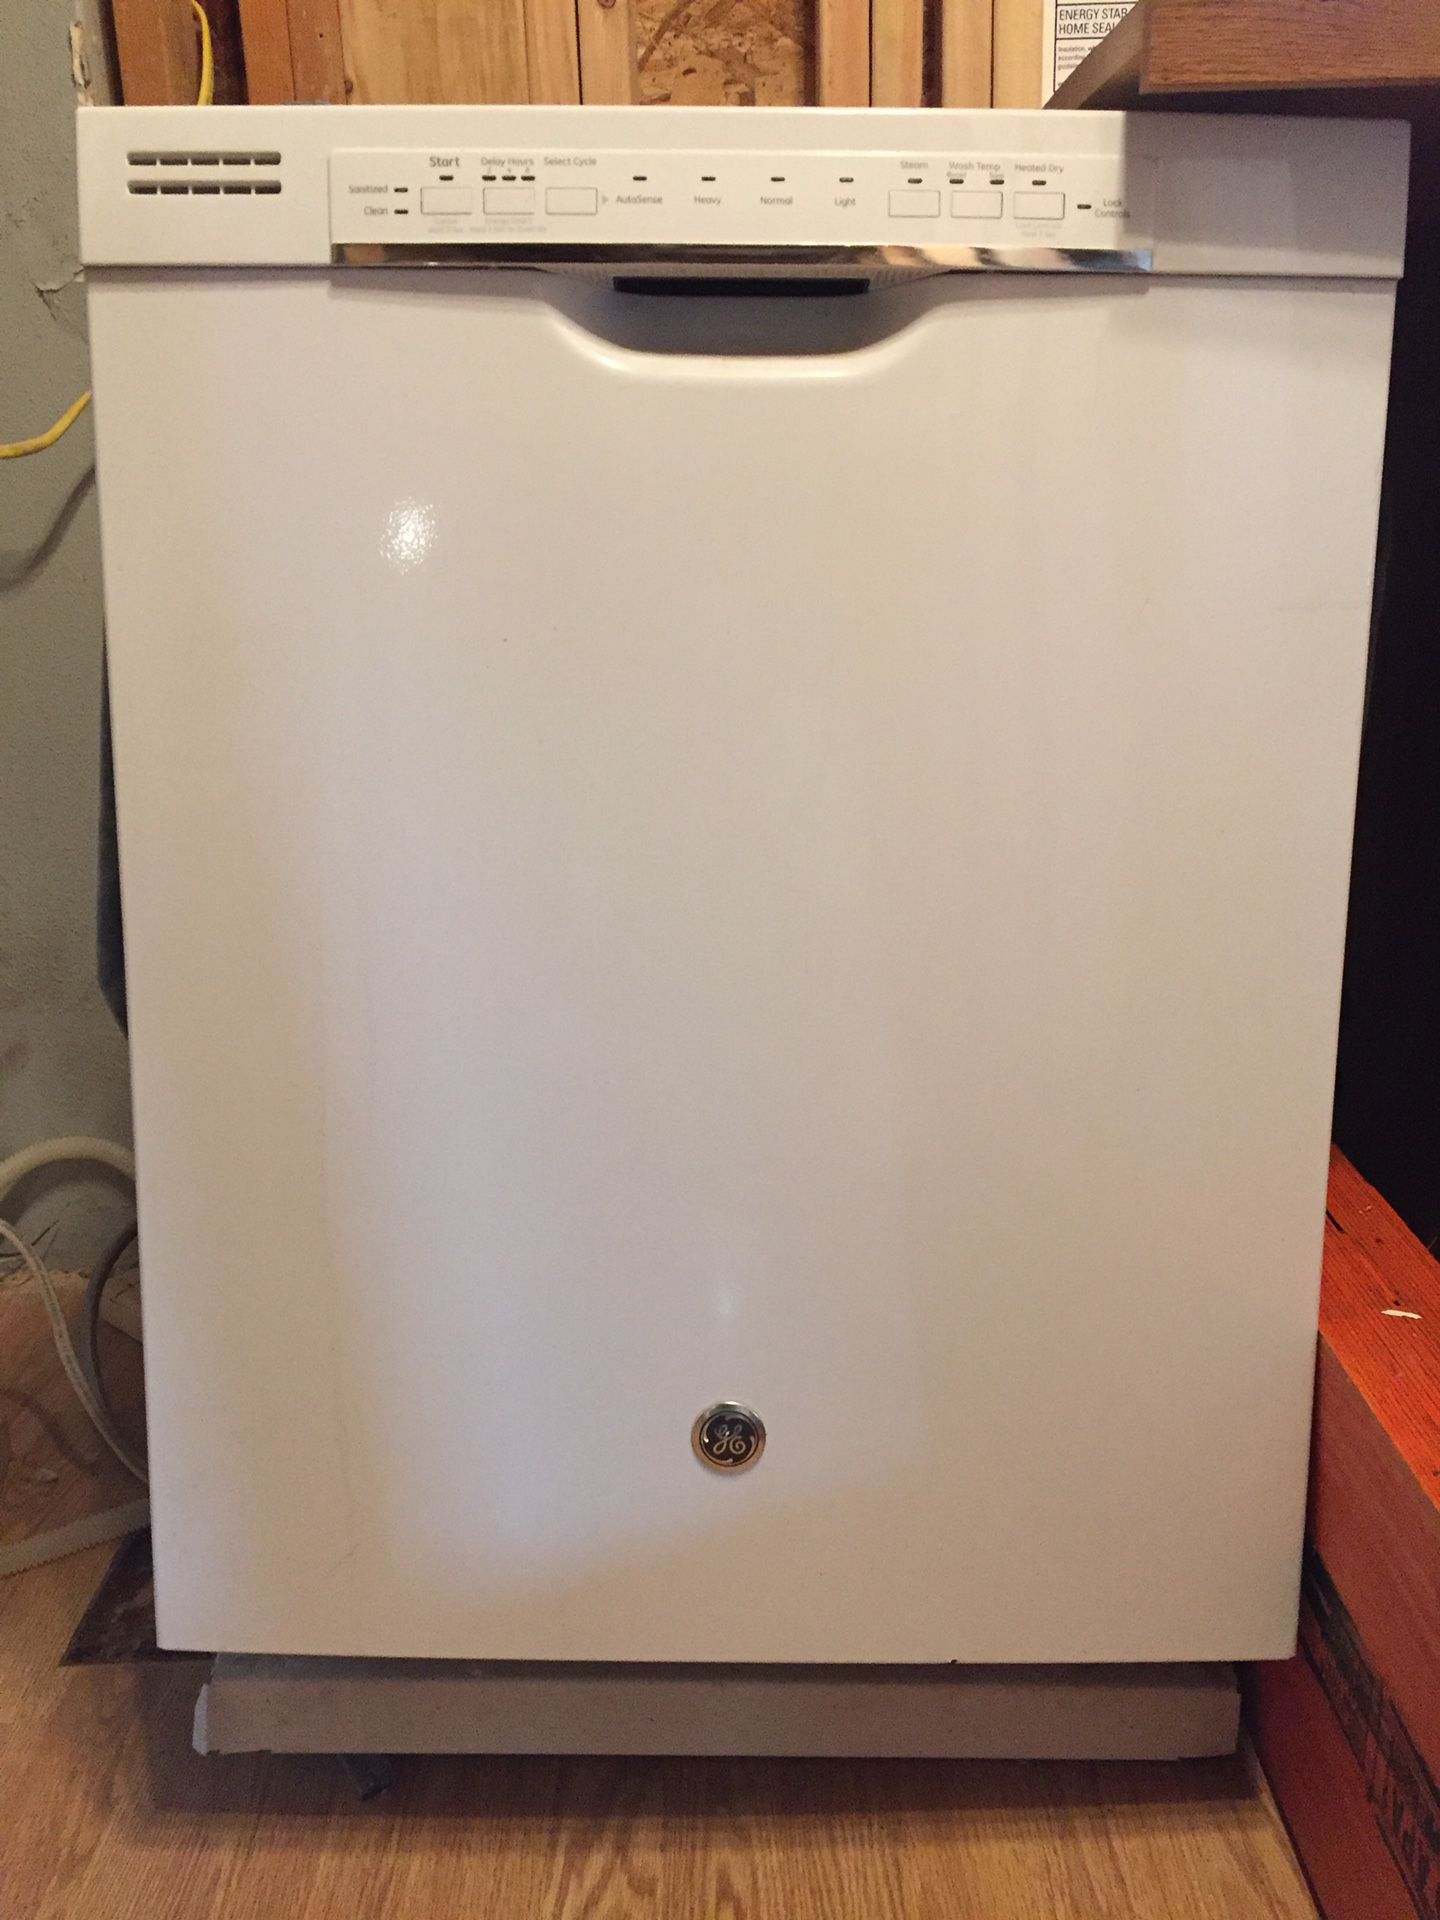 GE Dishwasher Great condition